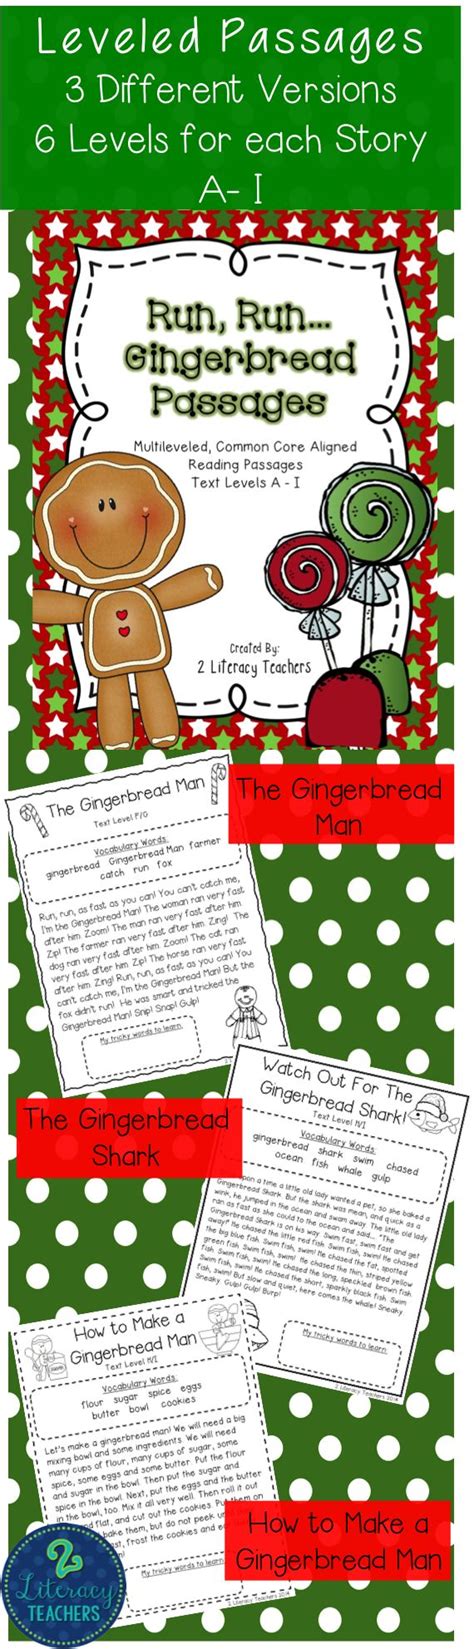 Gingerbread Passages Ccss Aligned Leveled Reading Passages And Activities A I Leveled Reading